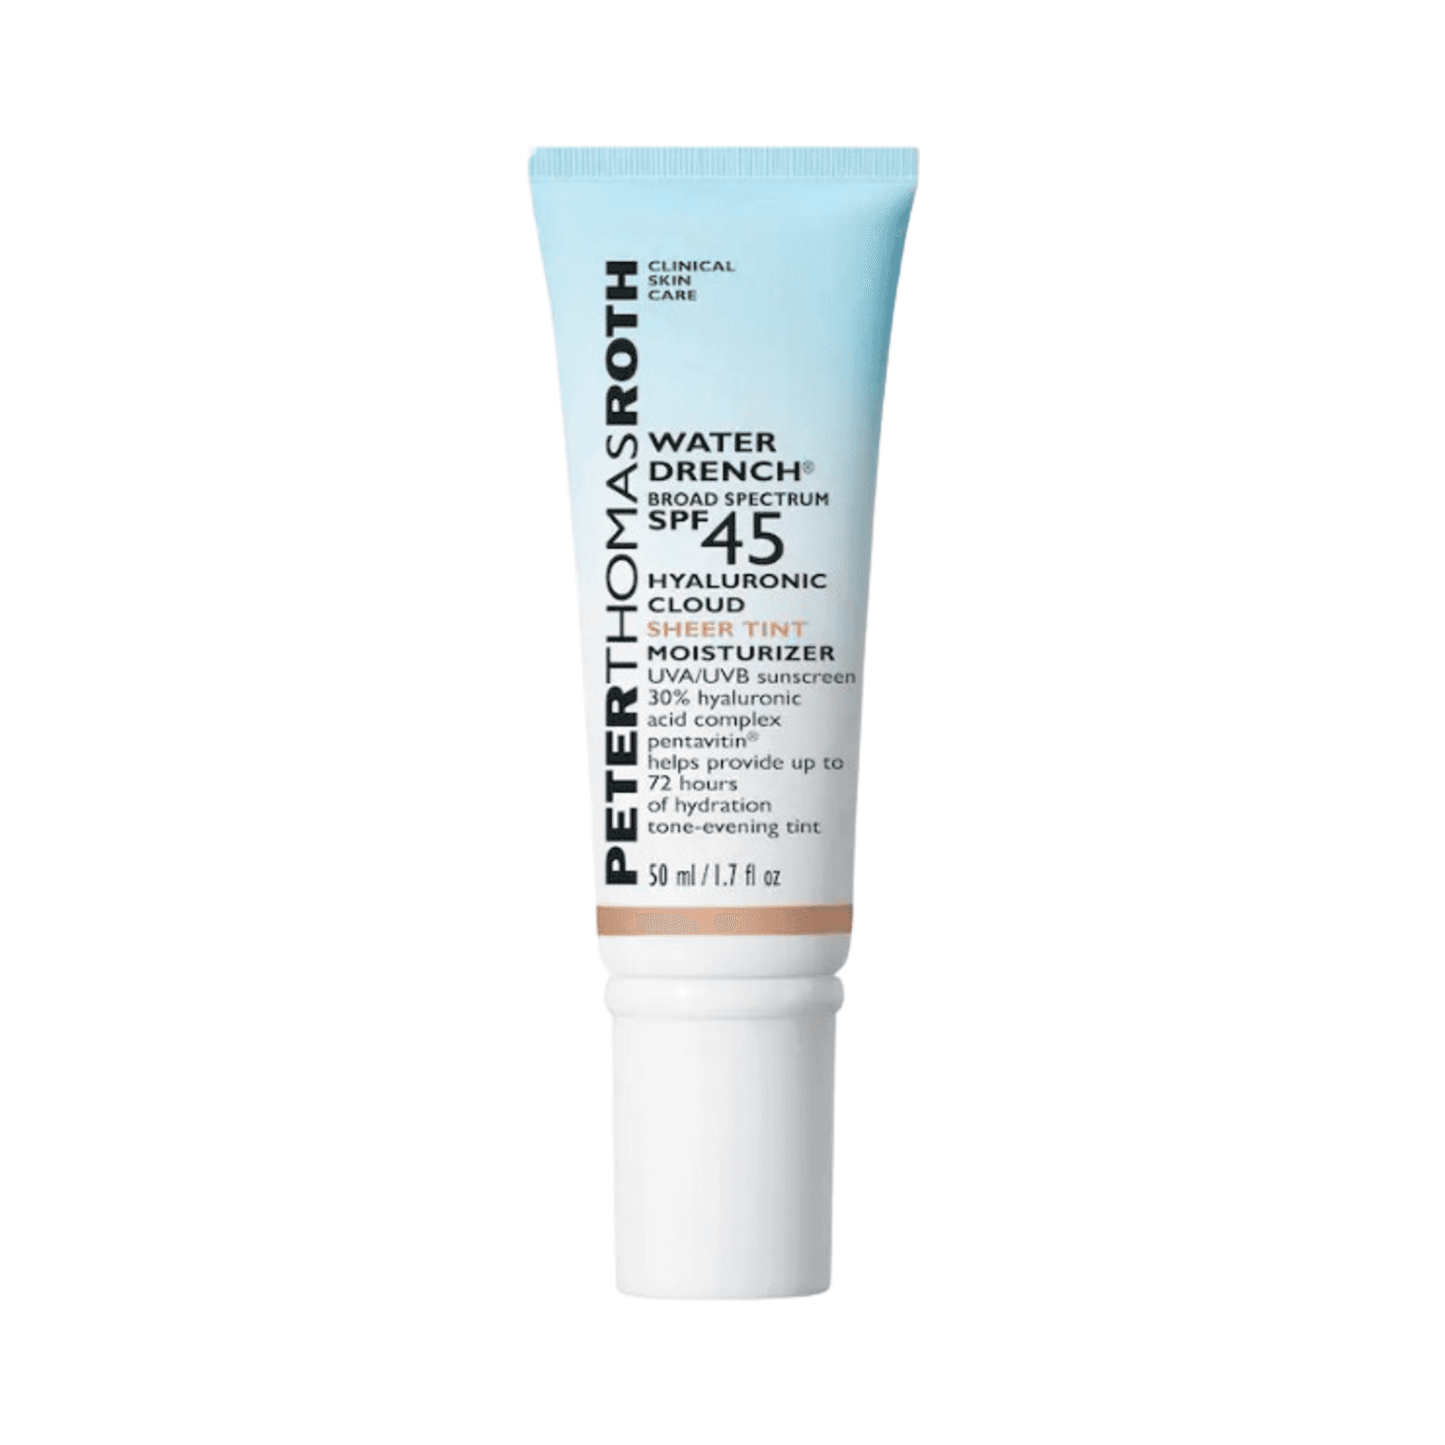 Peter Thomas Roth Water Drench Hyaluronic Cloud Sheer Tint Moisturizer Broad Spectrum Sunscreen SPF 45